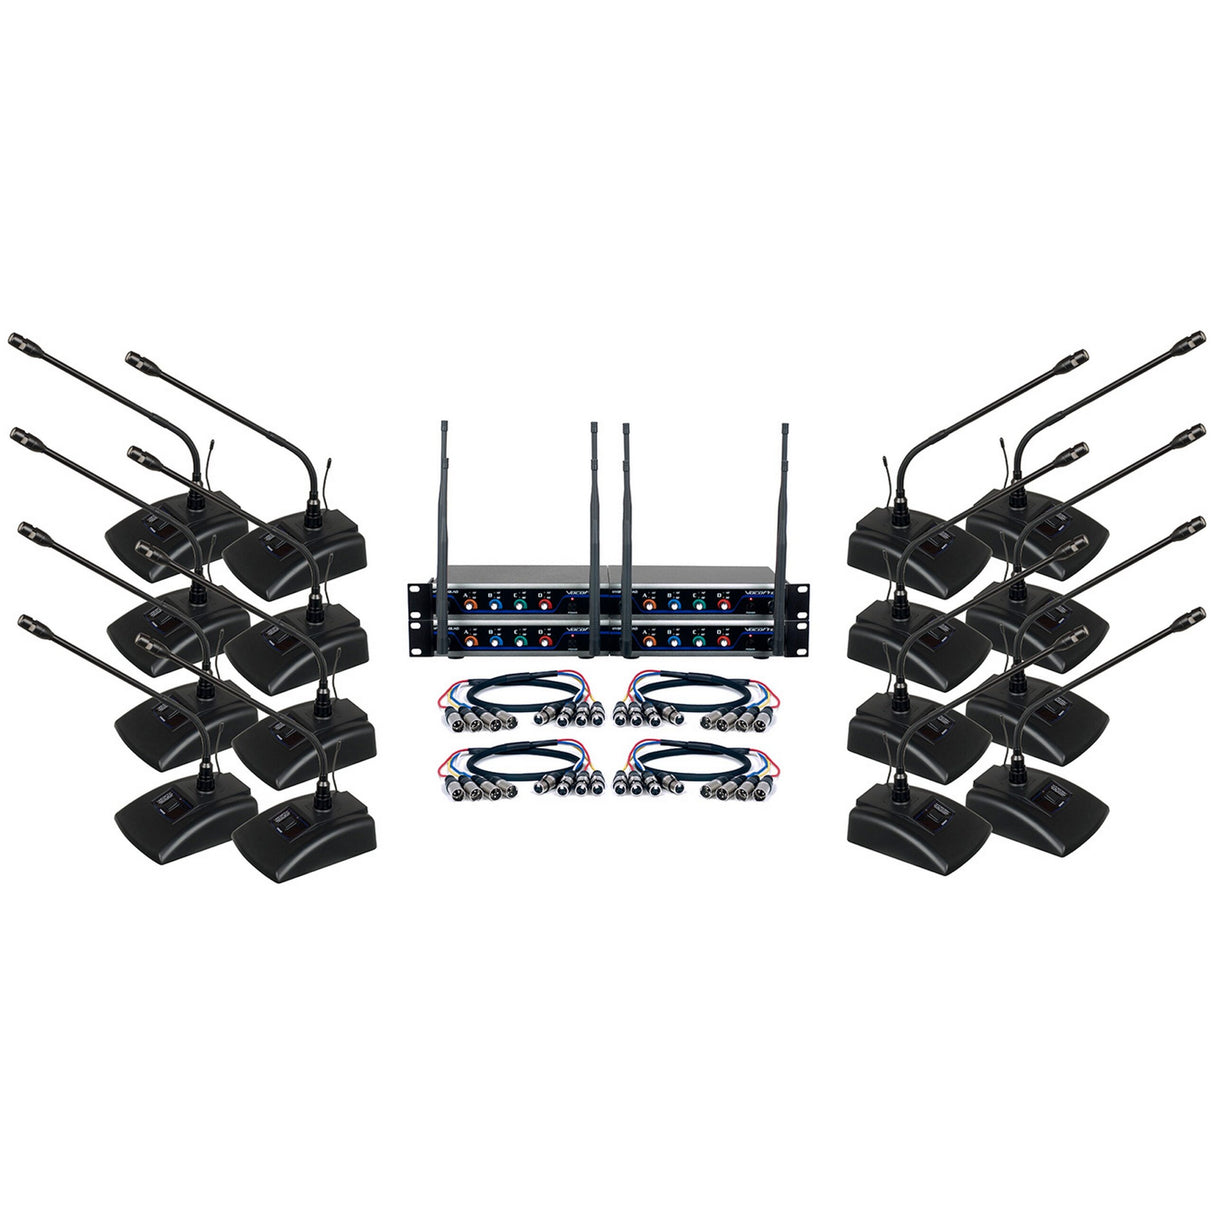 VocoPro DIGITAL-CONF-16 16-Channel UHF Wireless Conference Microphone System